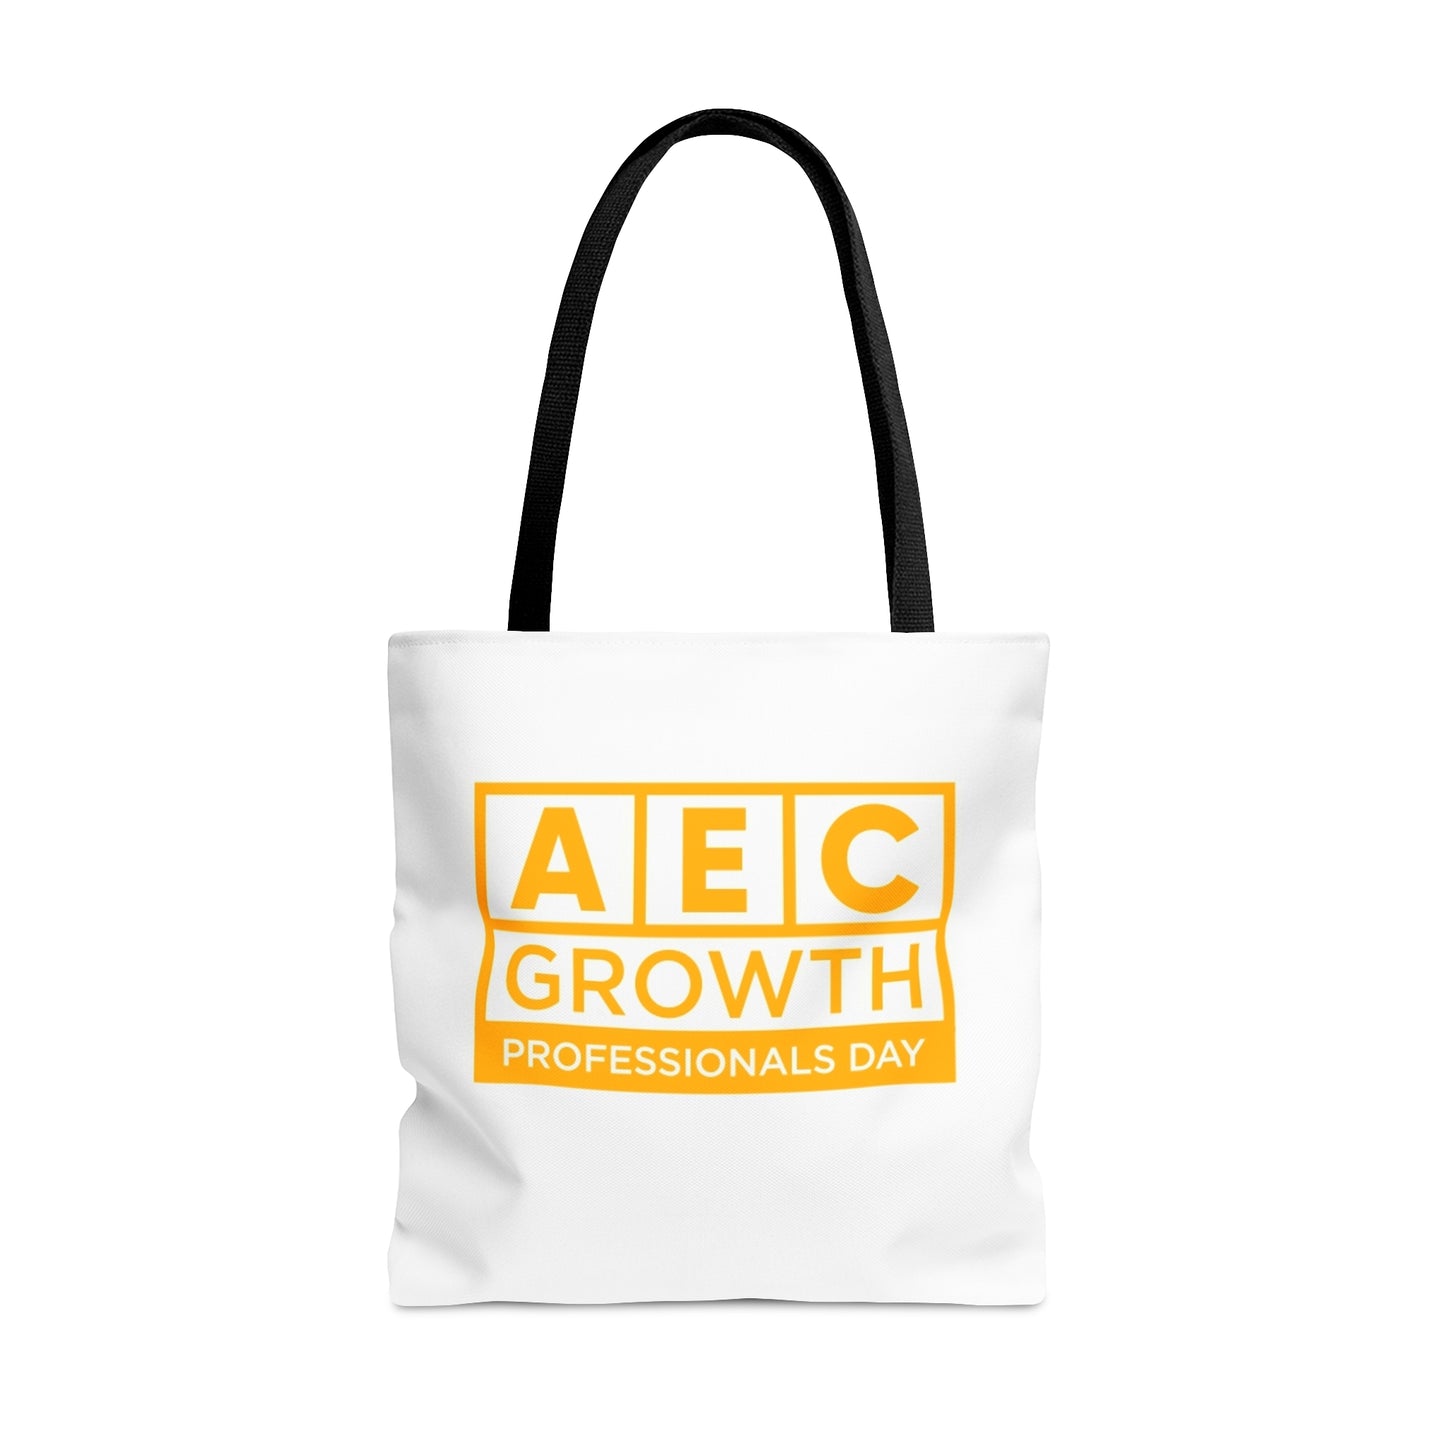 AEC Growth Professionals Day Tote Bag - Yellow